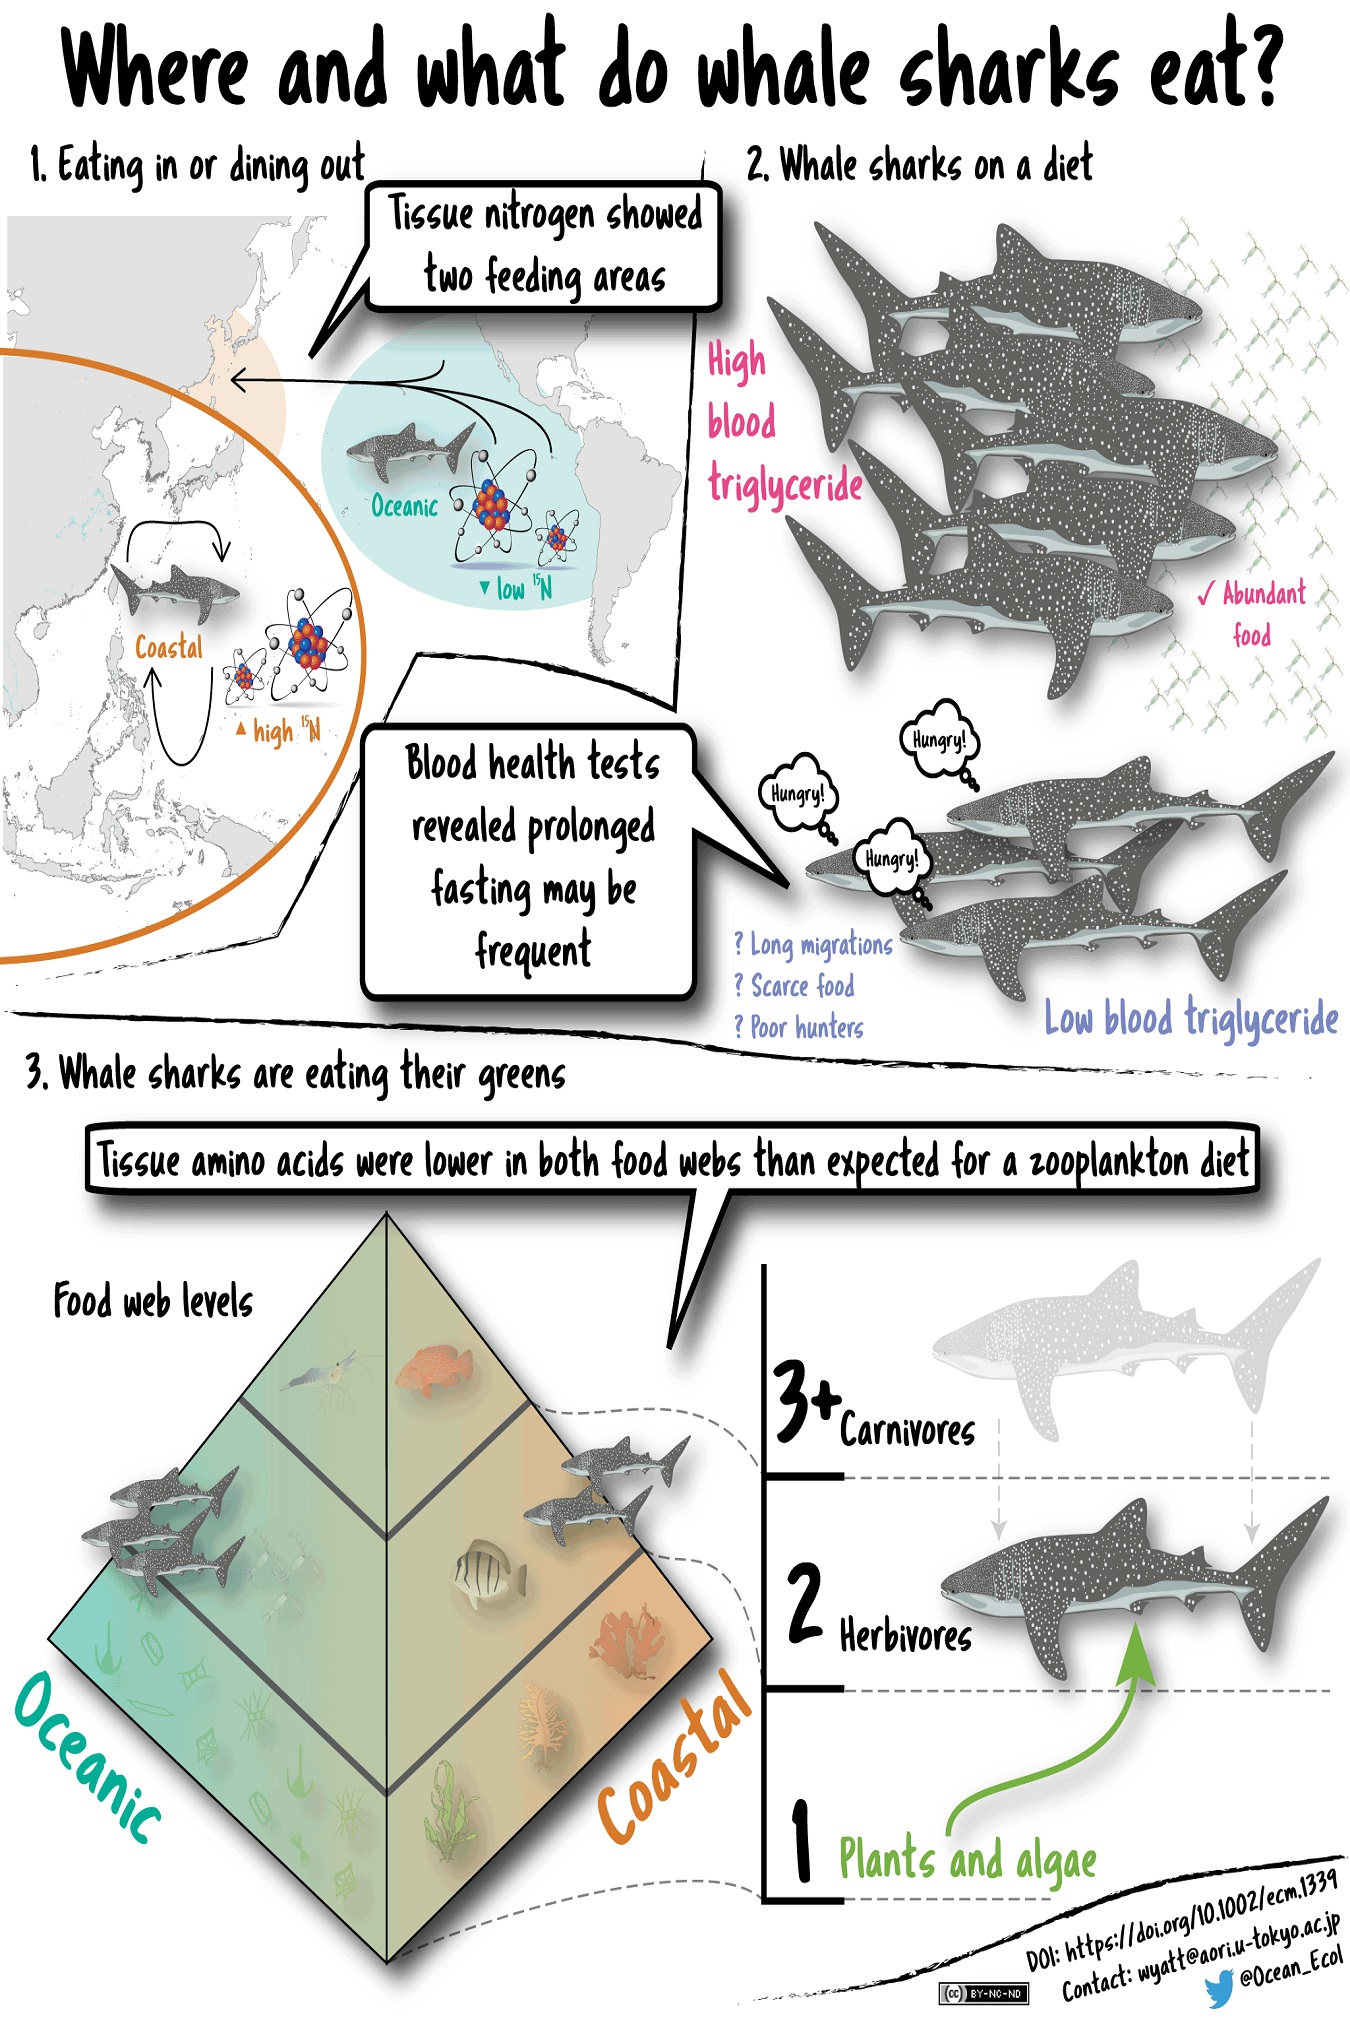 Cartoon showing whale shark migration maps and diet graphs.